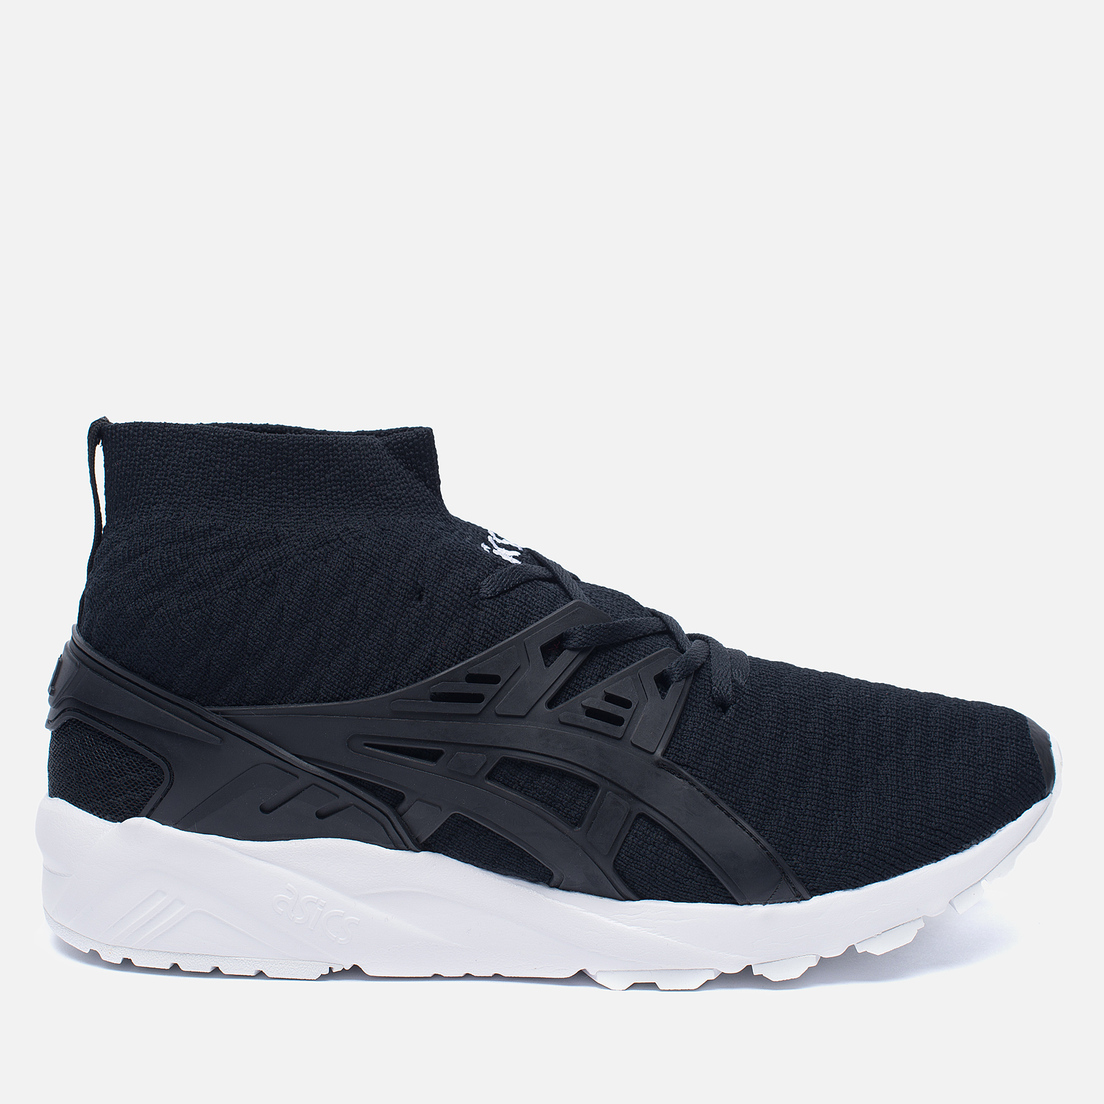 ASICS Кроссовки Gel-Kayano Trainer Knit MT Light And Shade Pack